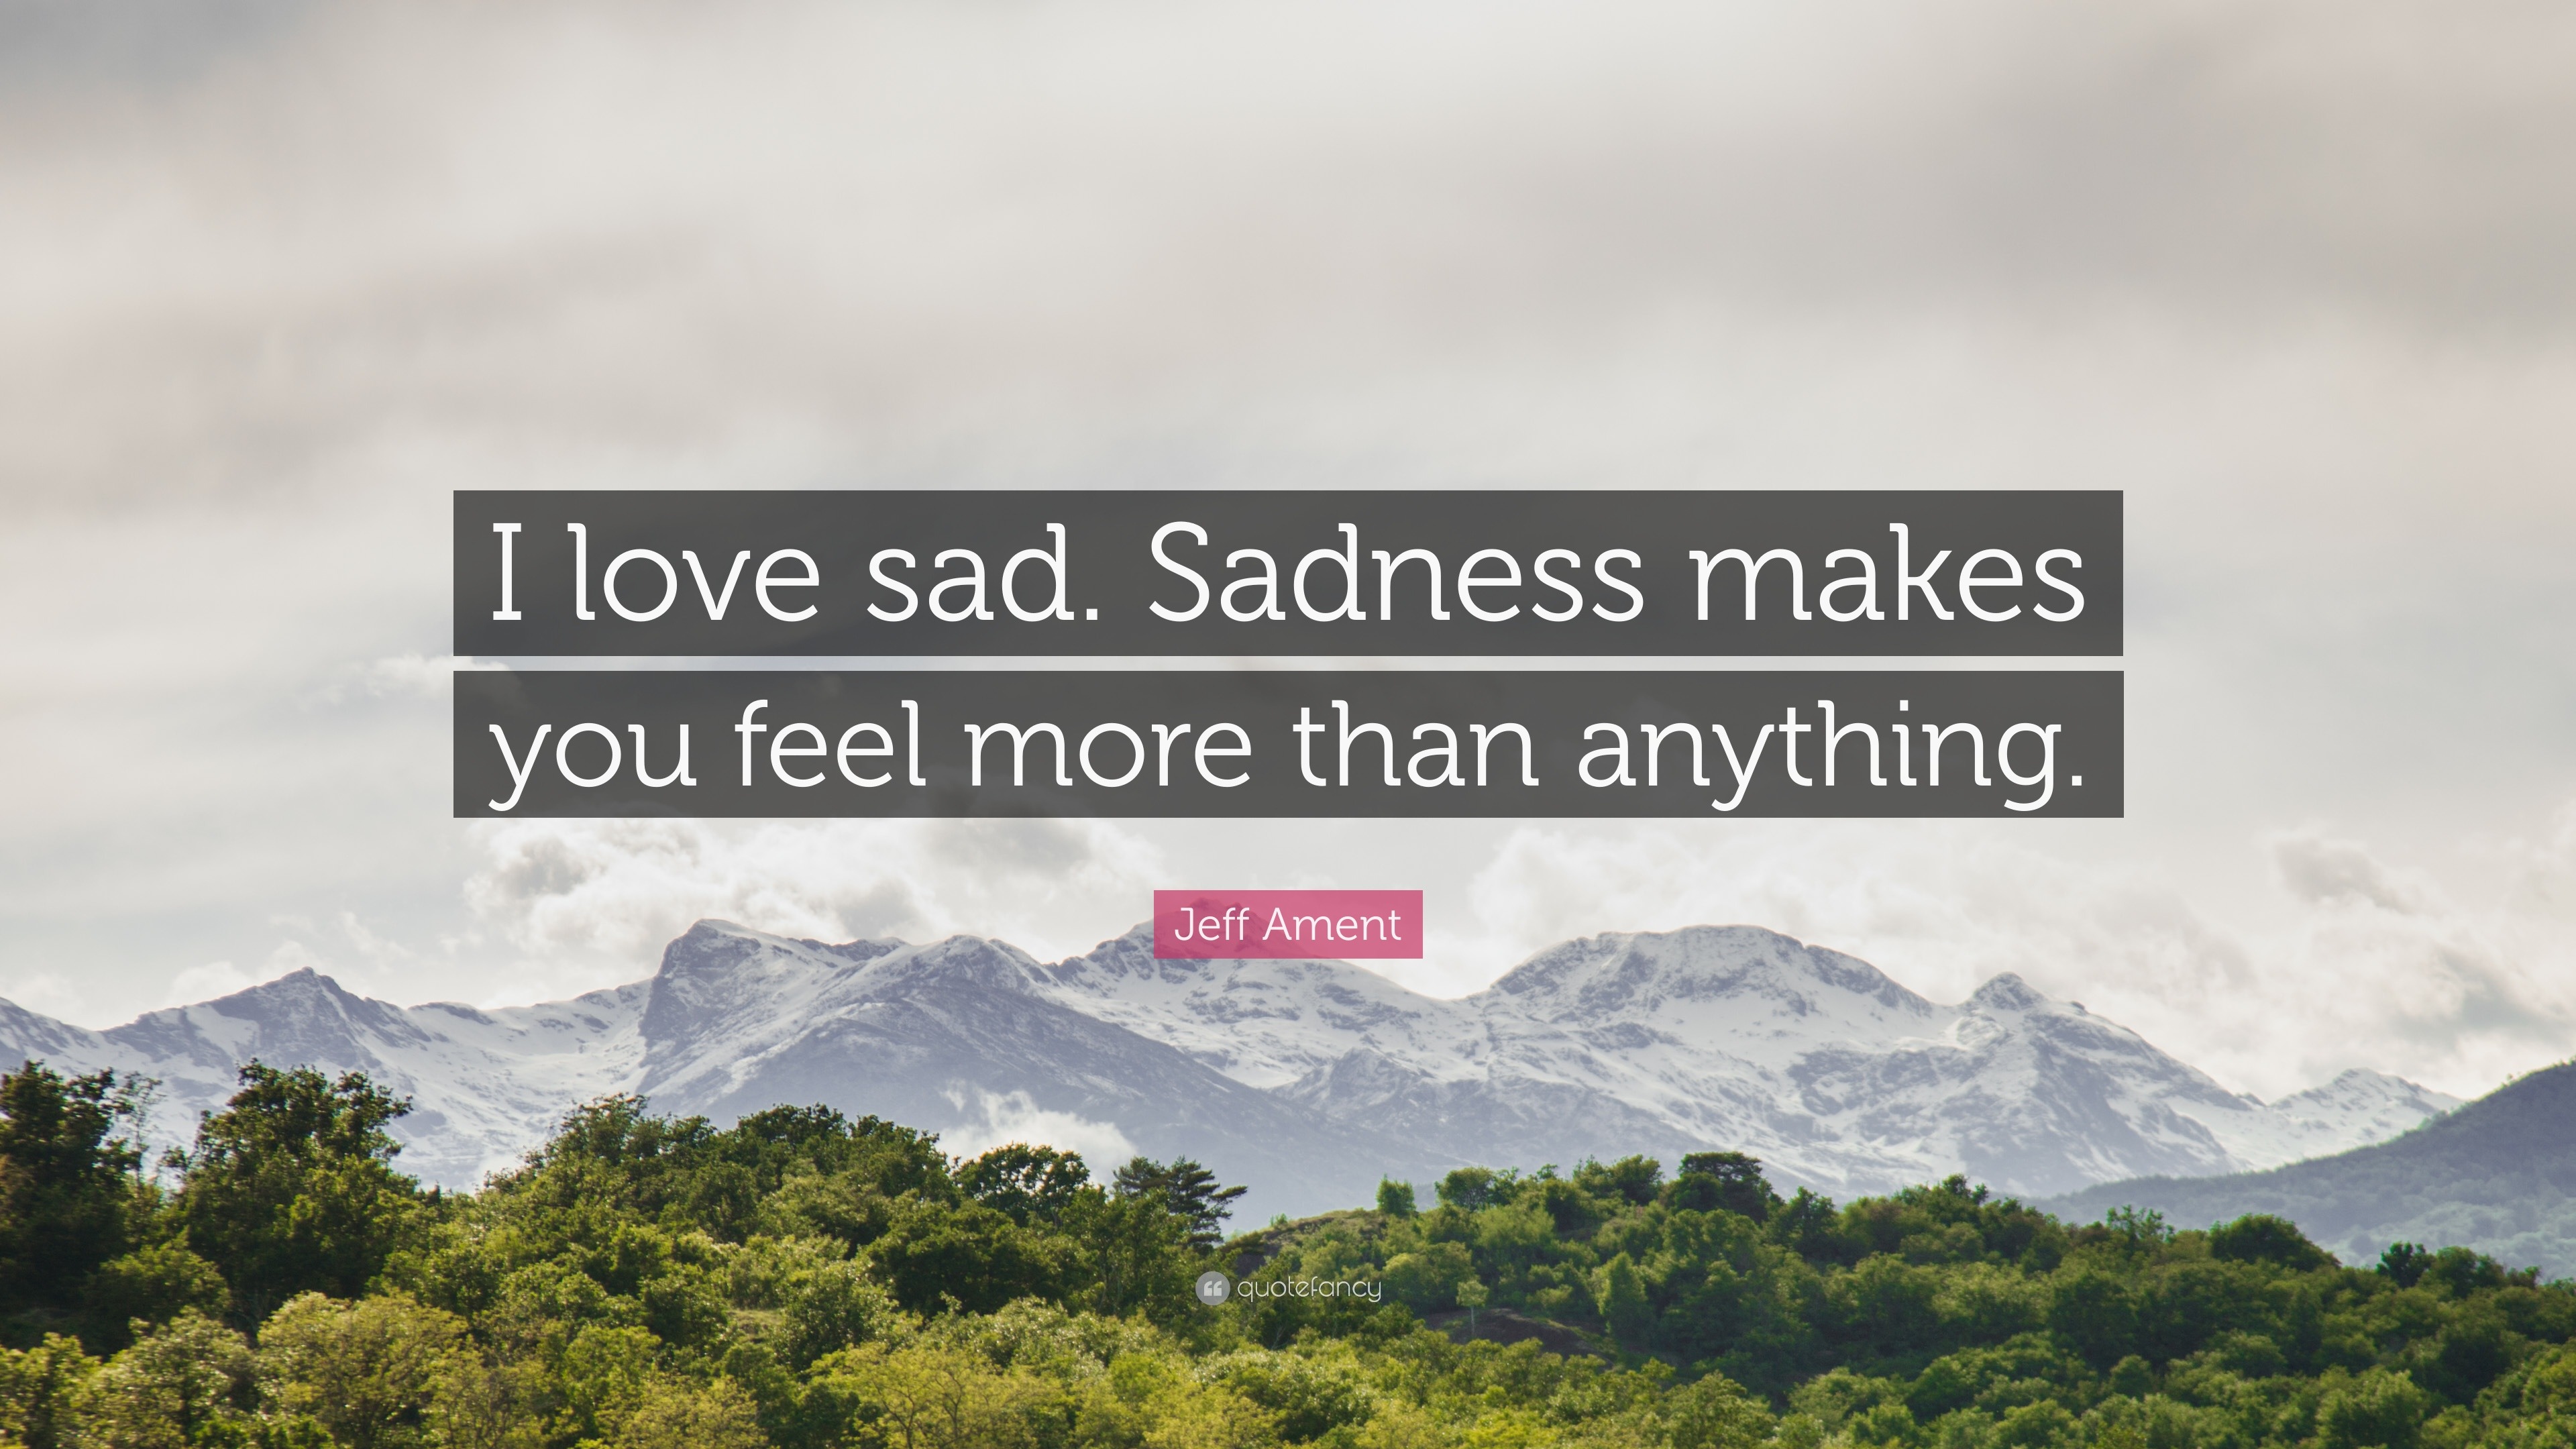 Jeff Ament Quote “I love sad Sadness makes you feel more than anything